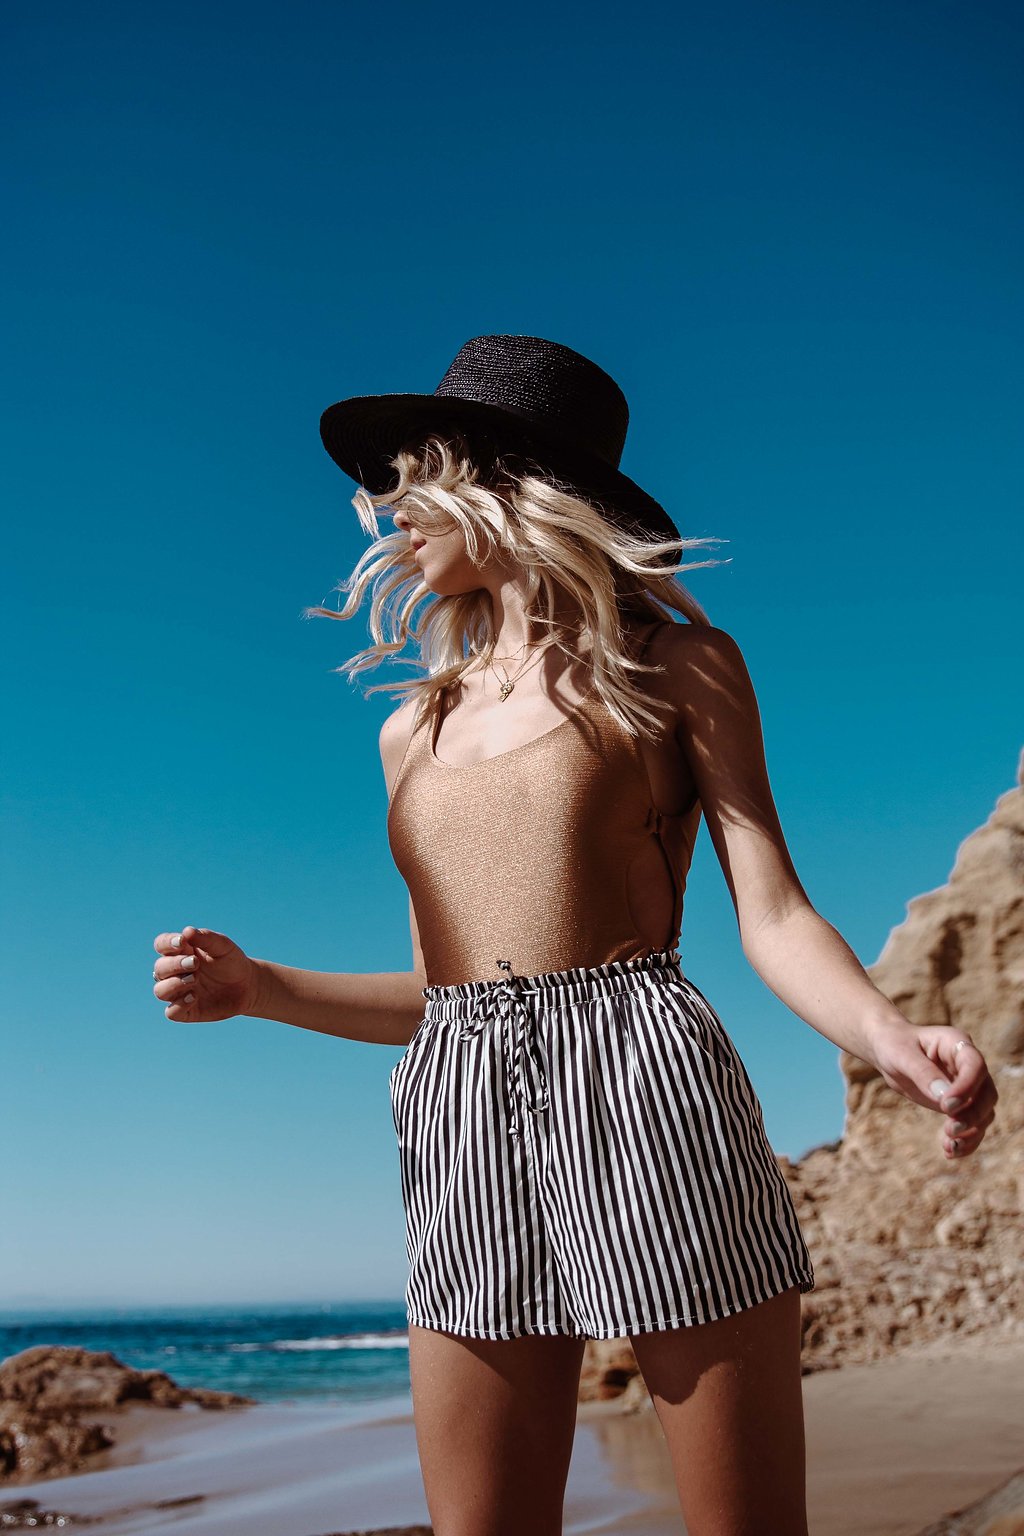 Beach Outfit Ideas: How to Look like a Local for a Day at the Beach